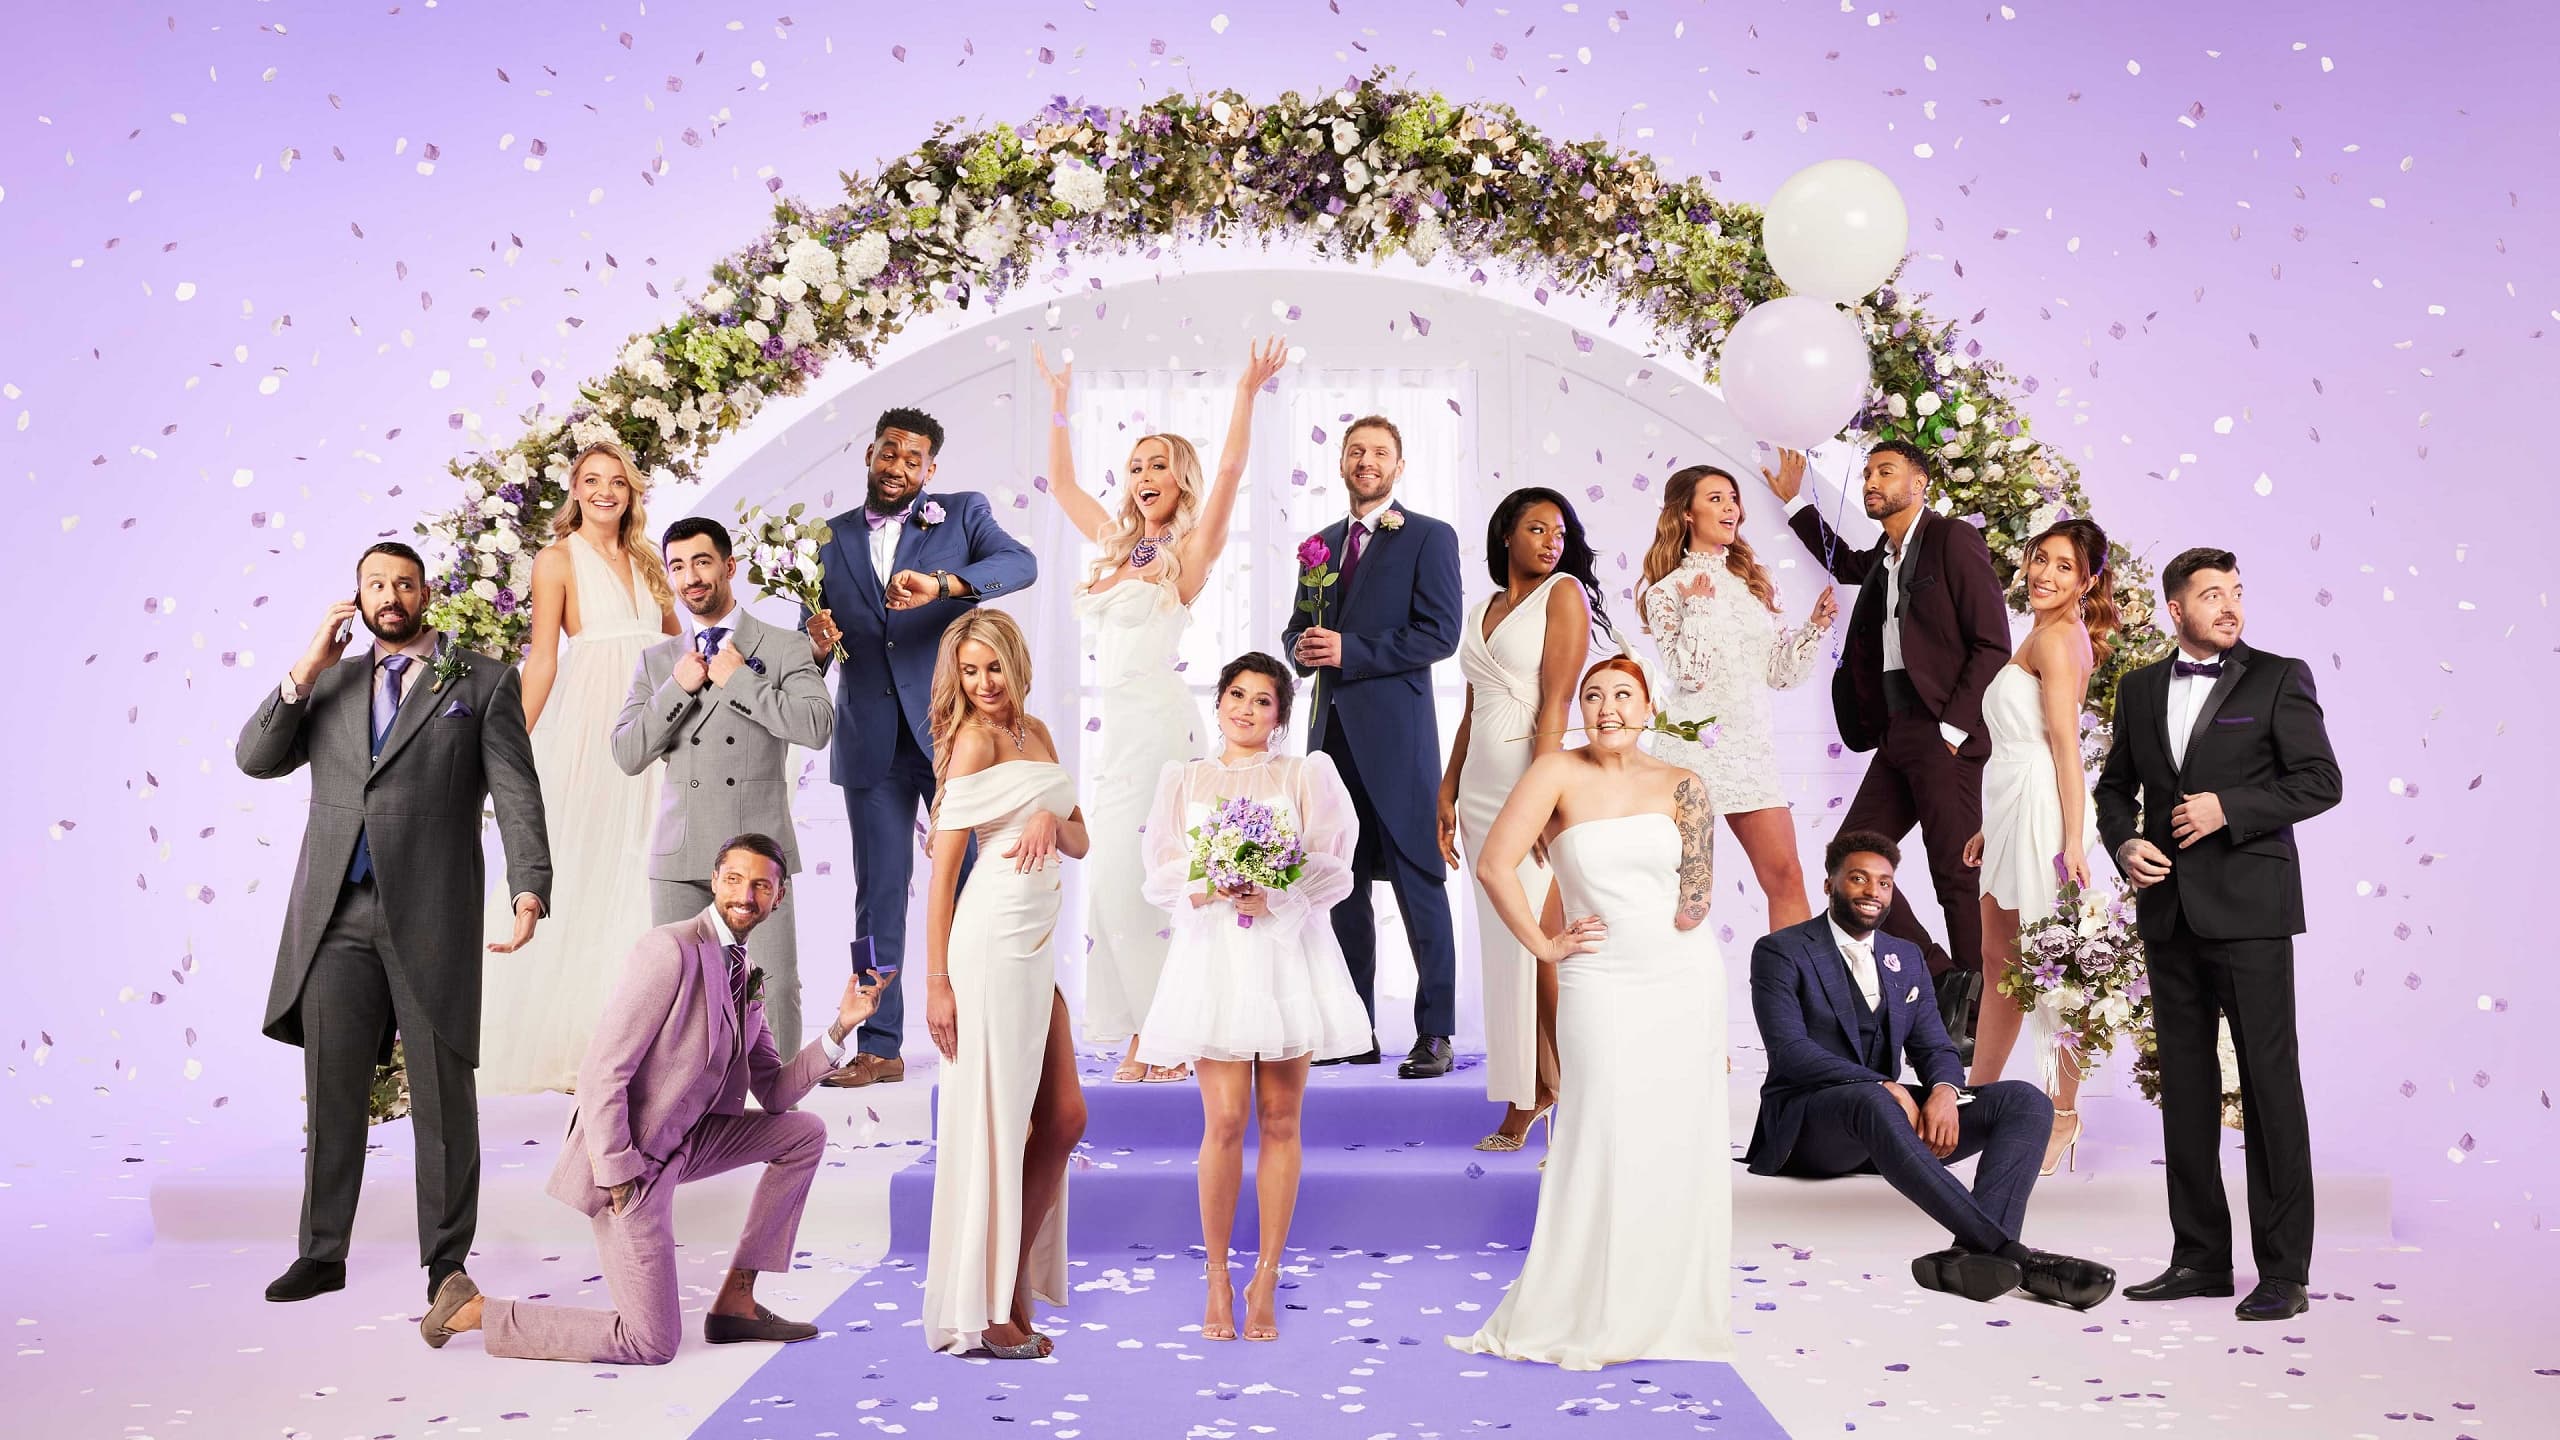 Married at First Sight UK - Season 7 Episode 20